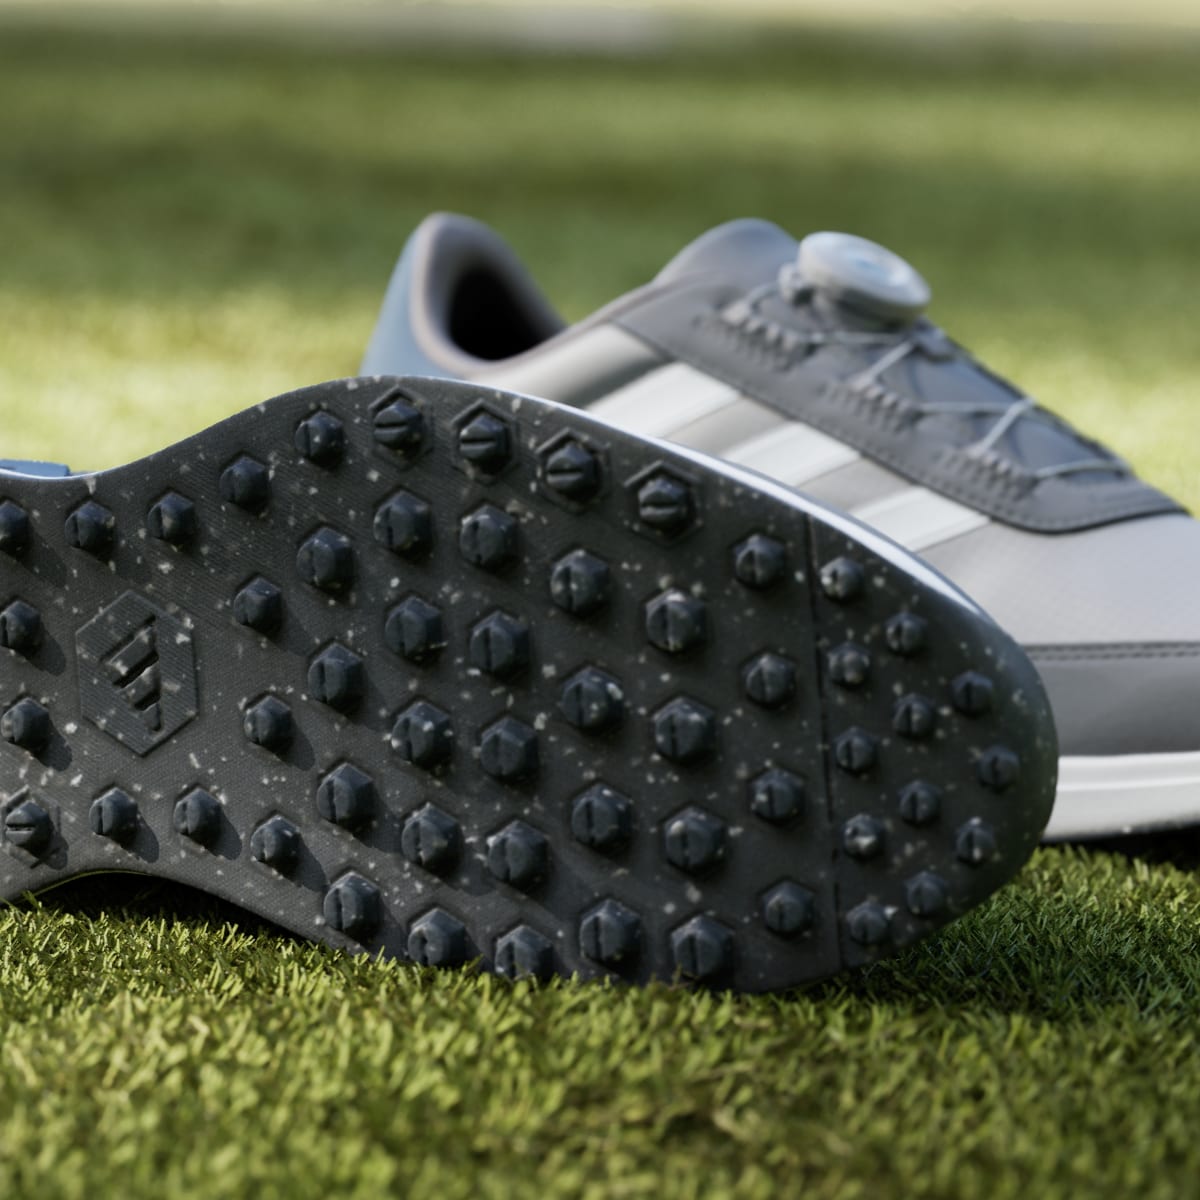 Adidas S2G BOA 24 Wide Spikeless Golf Shoes. 8